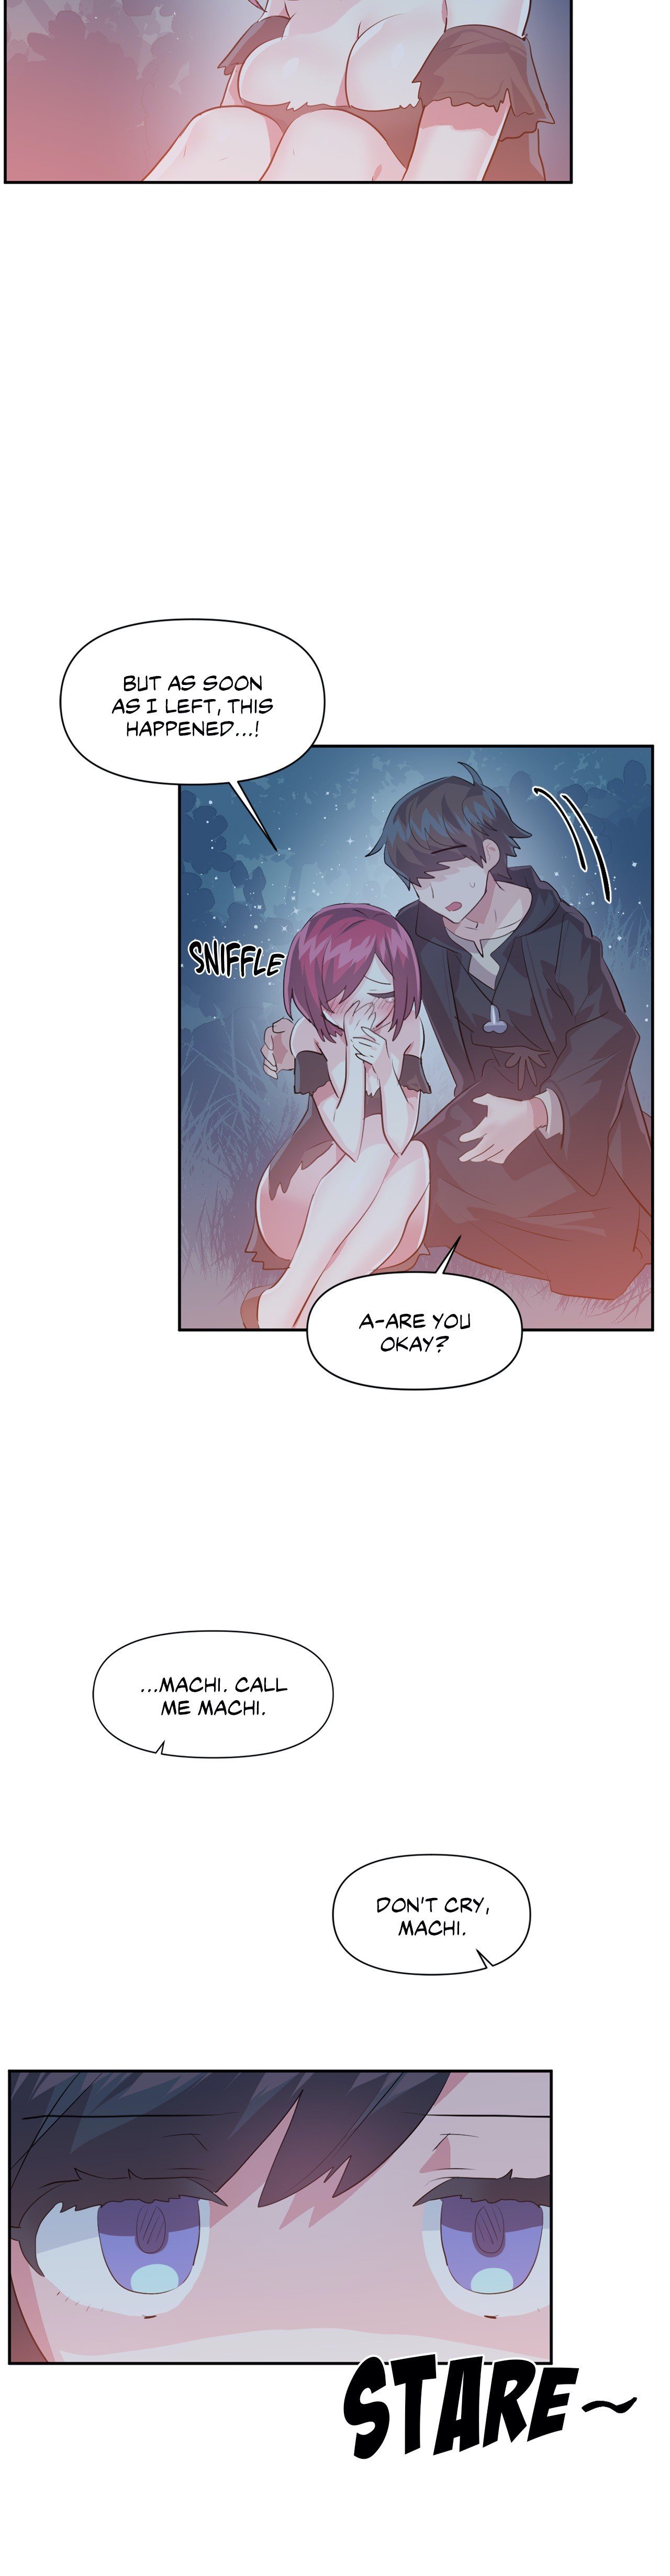 log-in-to-lust-a-land-chap-37-3